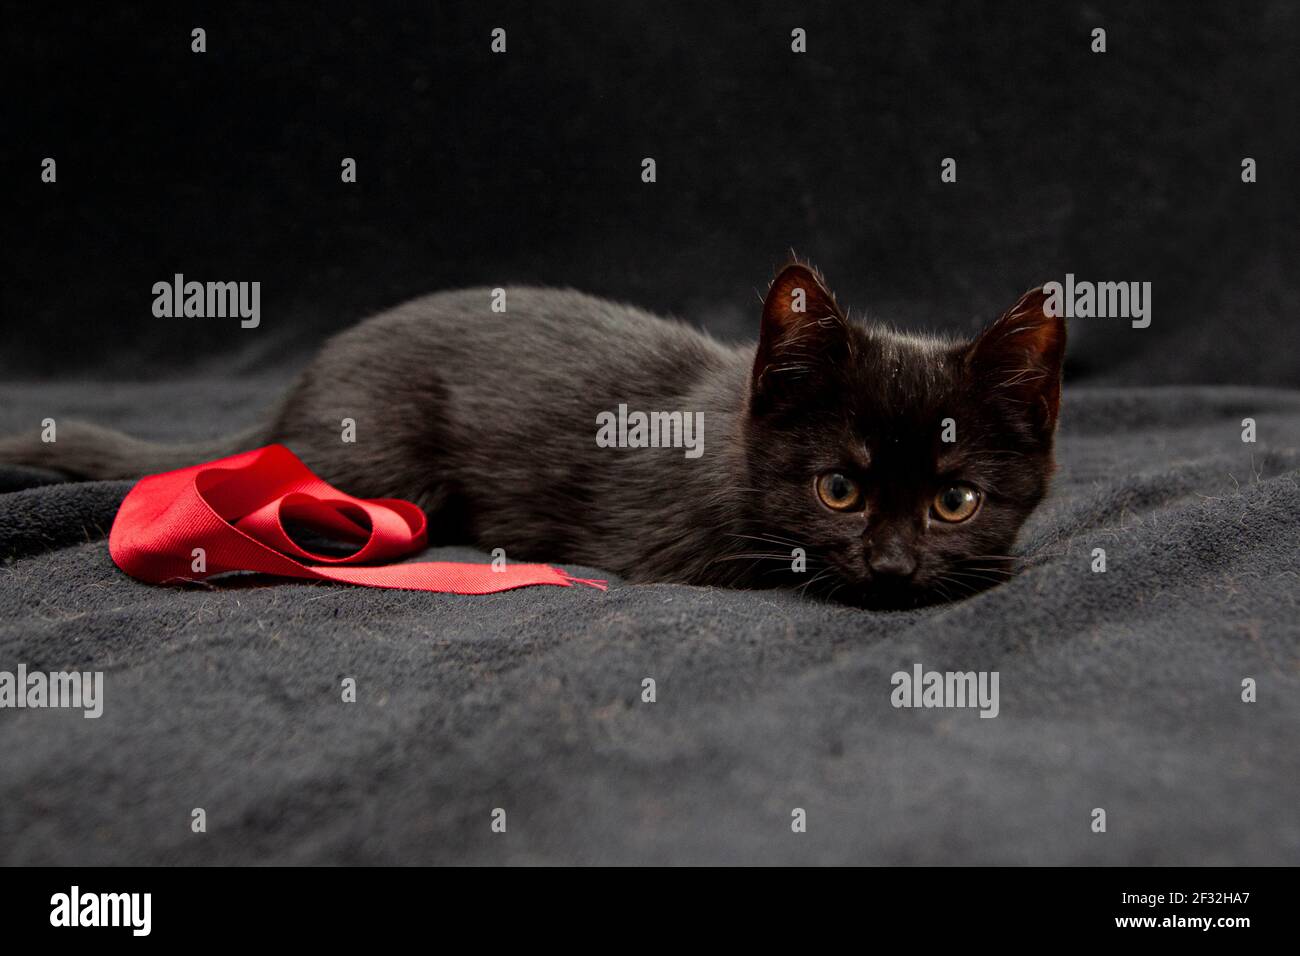 A four week old black kitten on a bed with black blanket and red ribbon Stock Photo